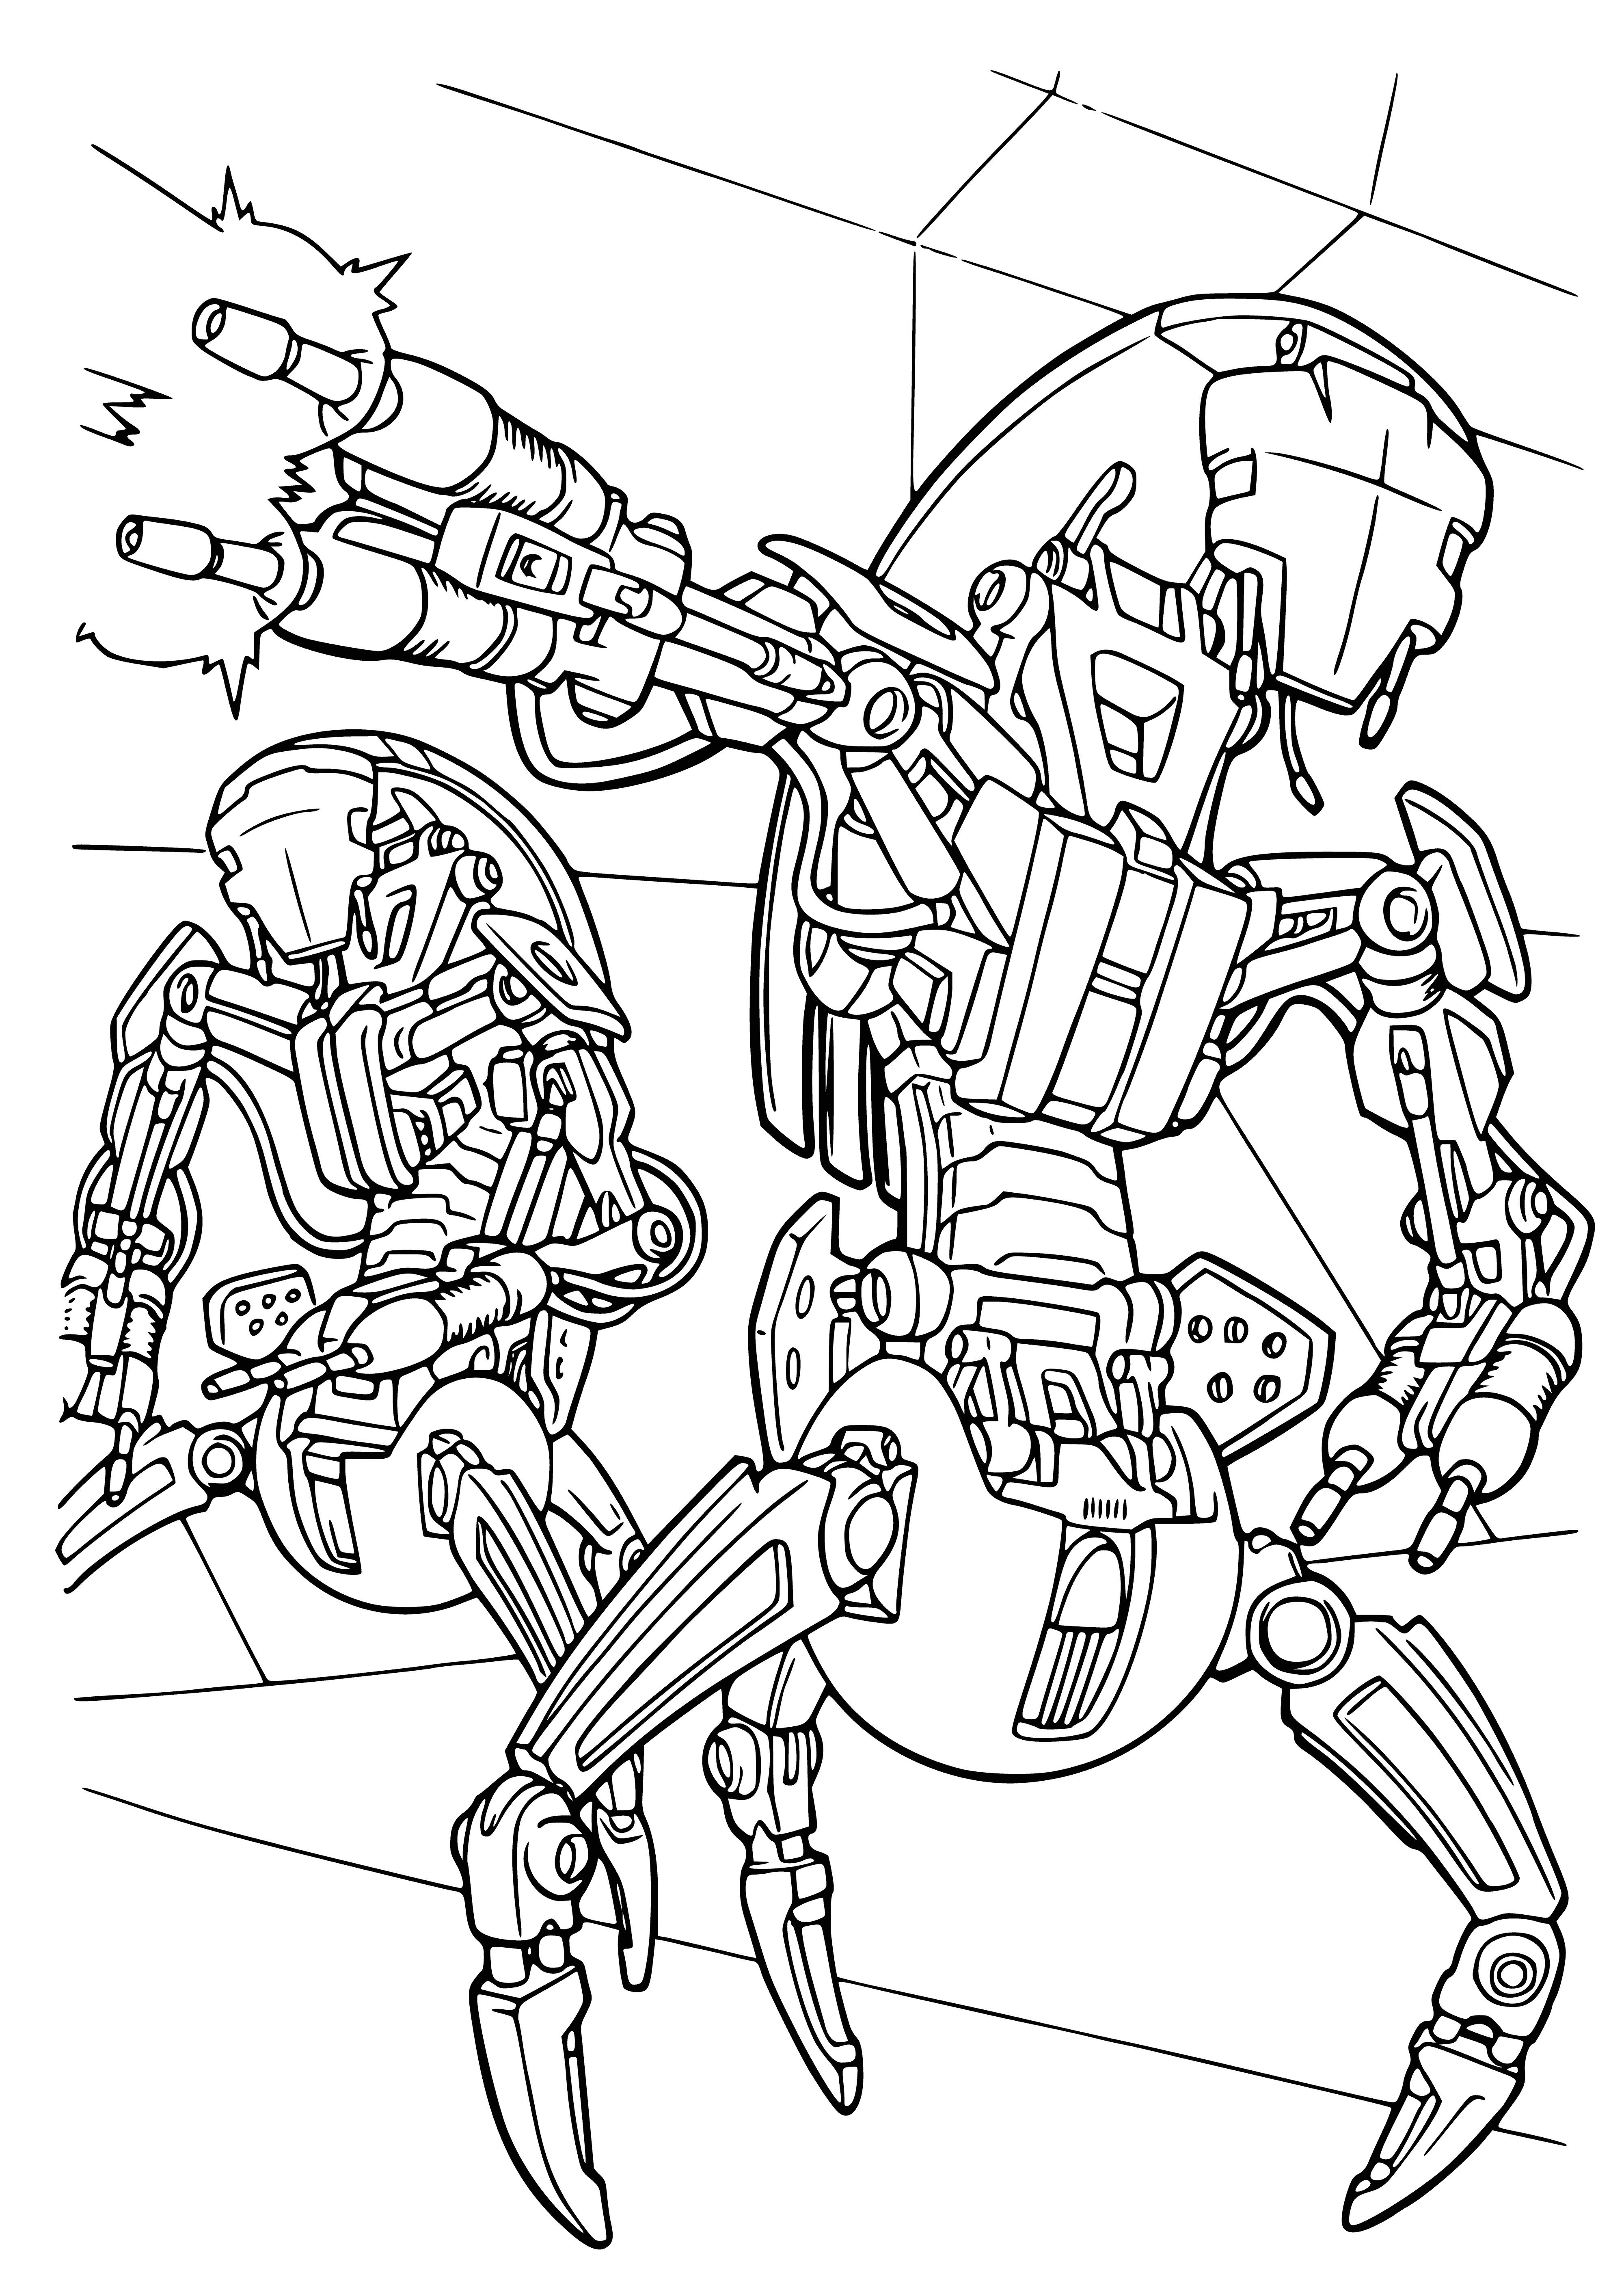 coloring page: Droid part of Trade Federation army with guns on arms, tall and intimidating.